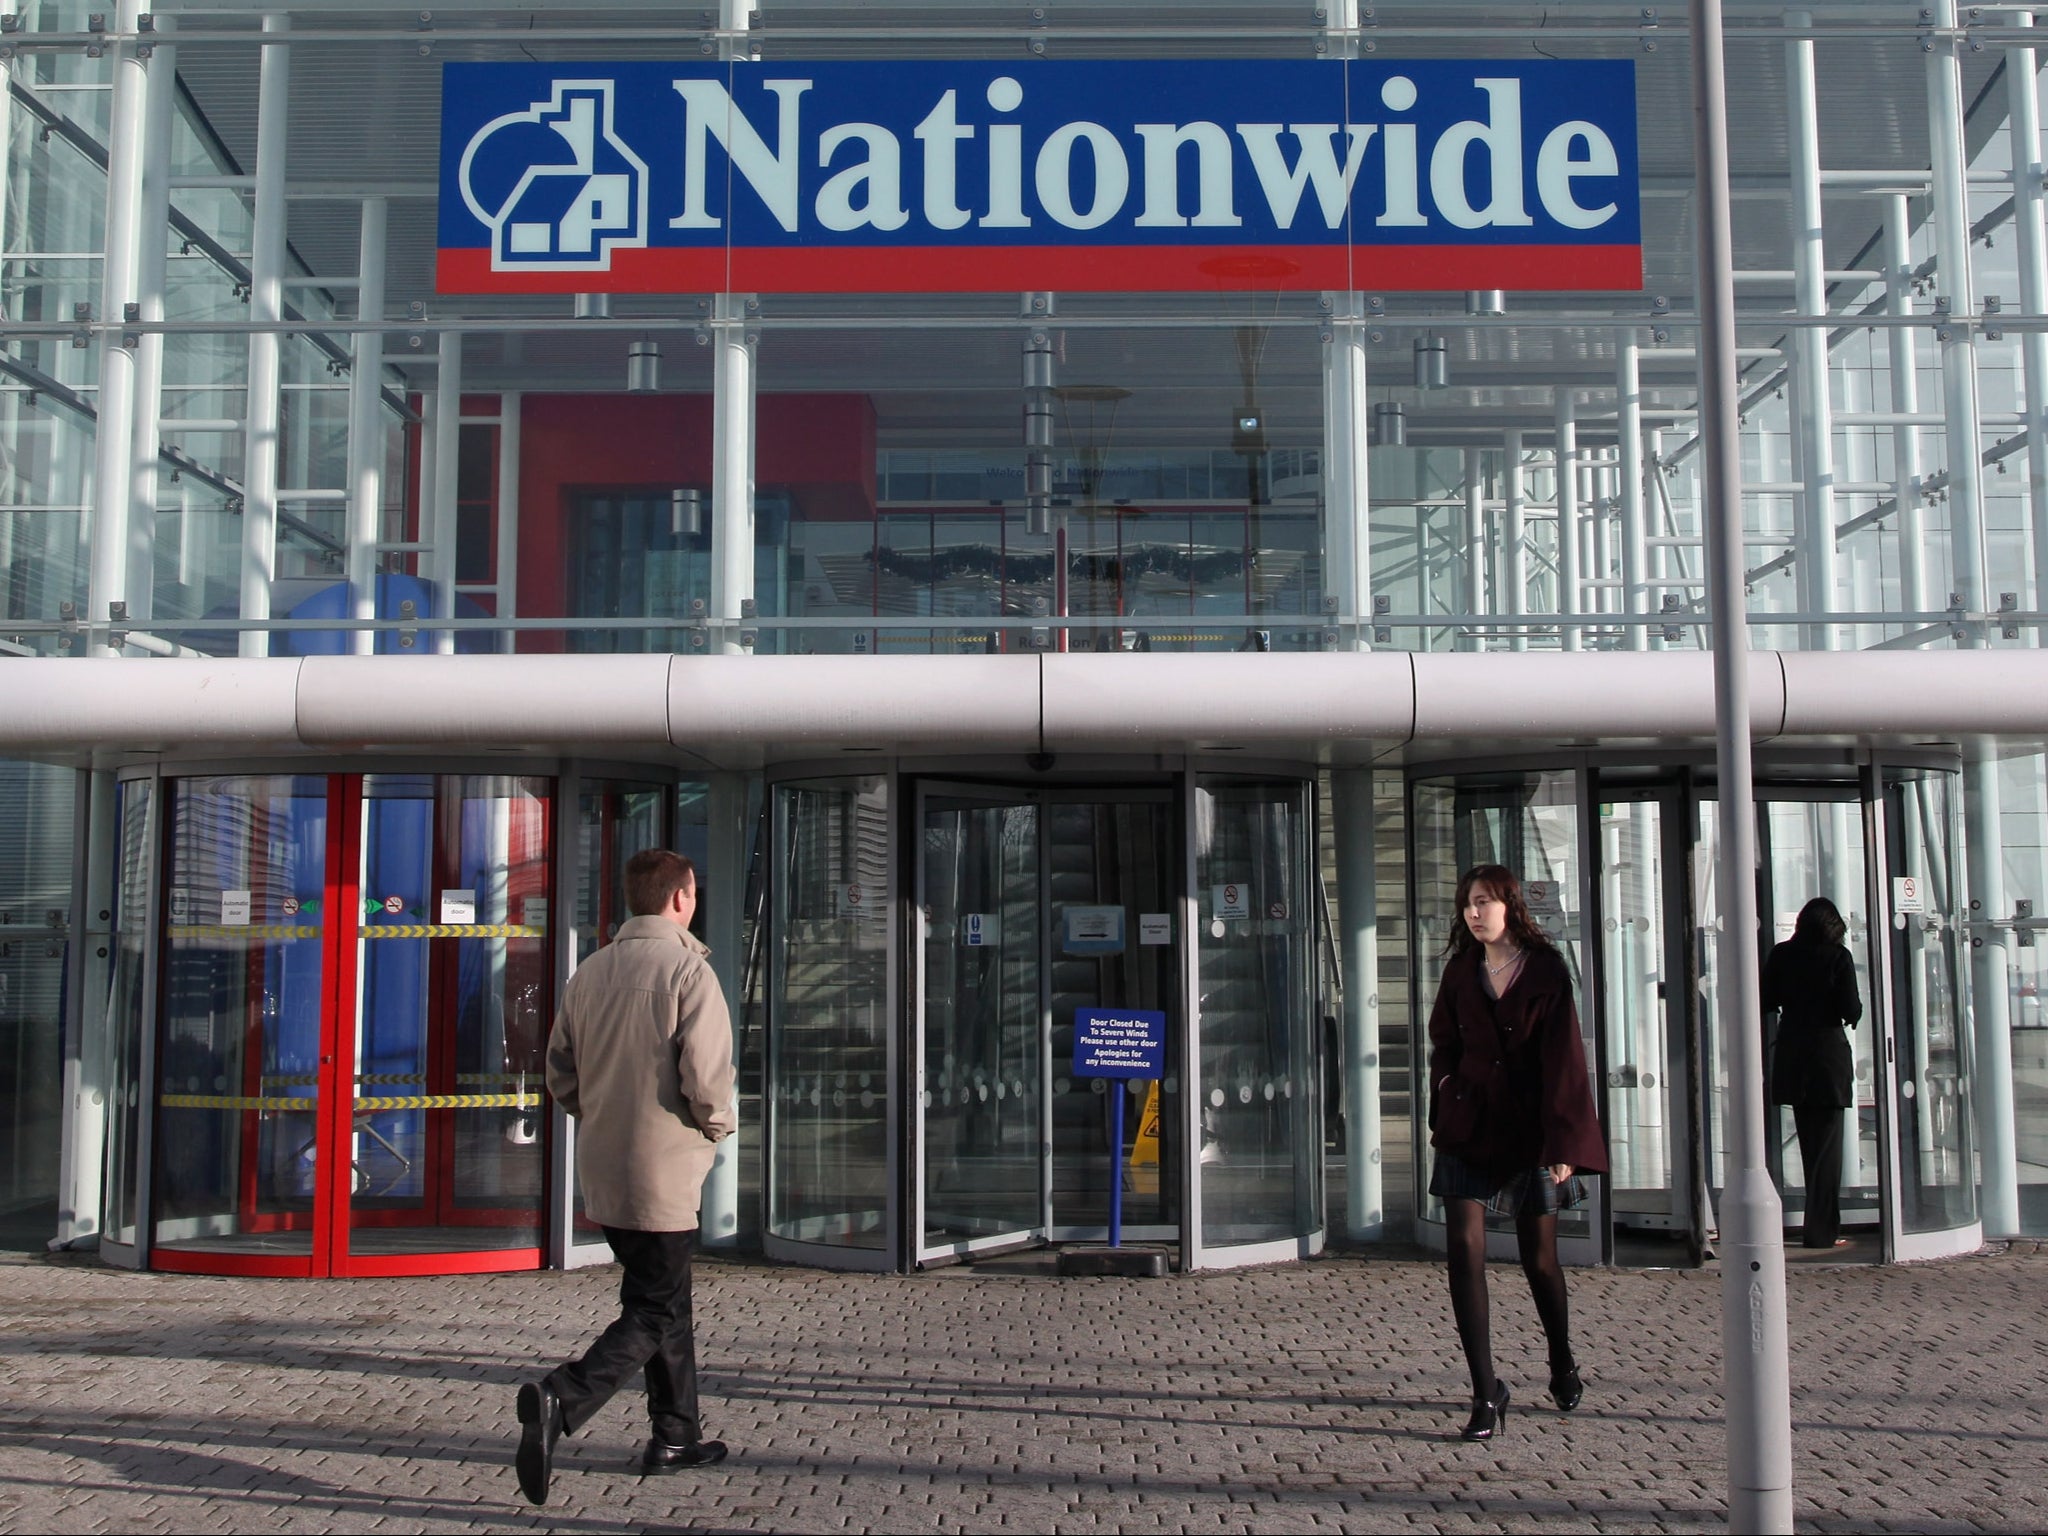 Nationwide will distribute a £340 million pot to eligible members, with information about the payment set to be revealed to them on Friday